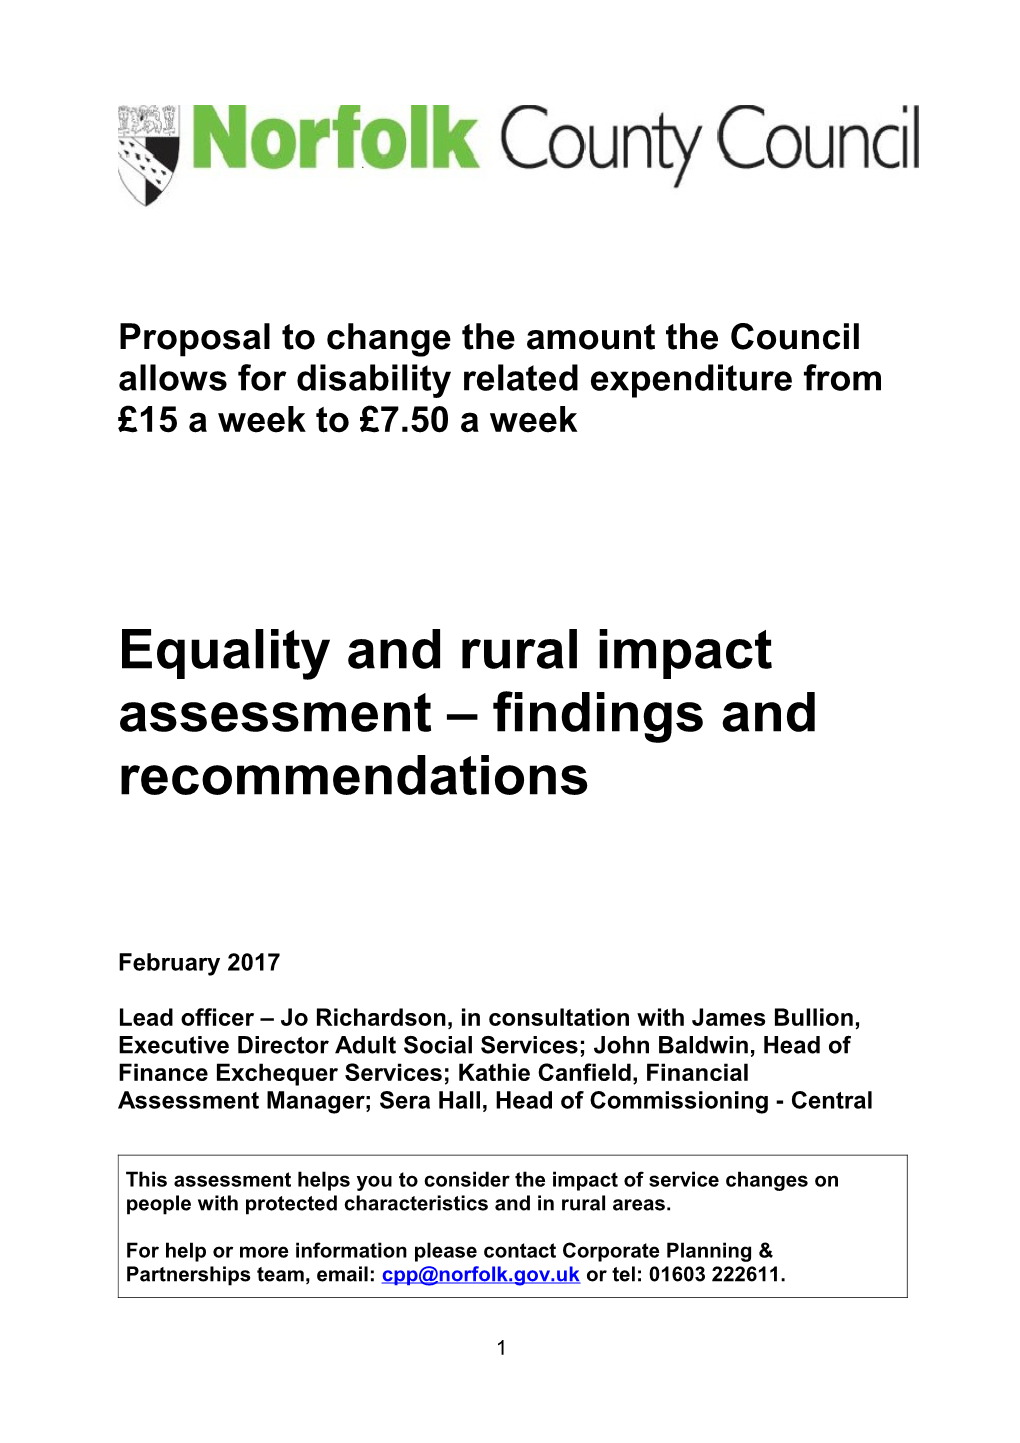 Equality and Rural Impact Assessment Findings and Recommendations